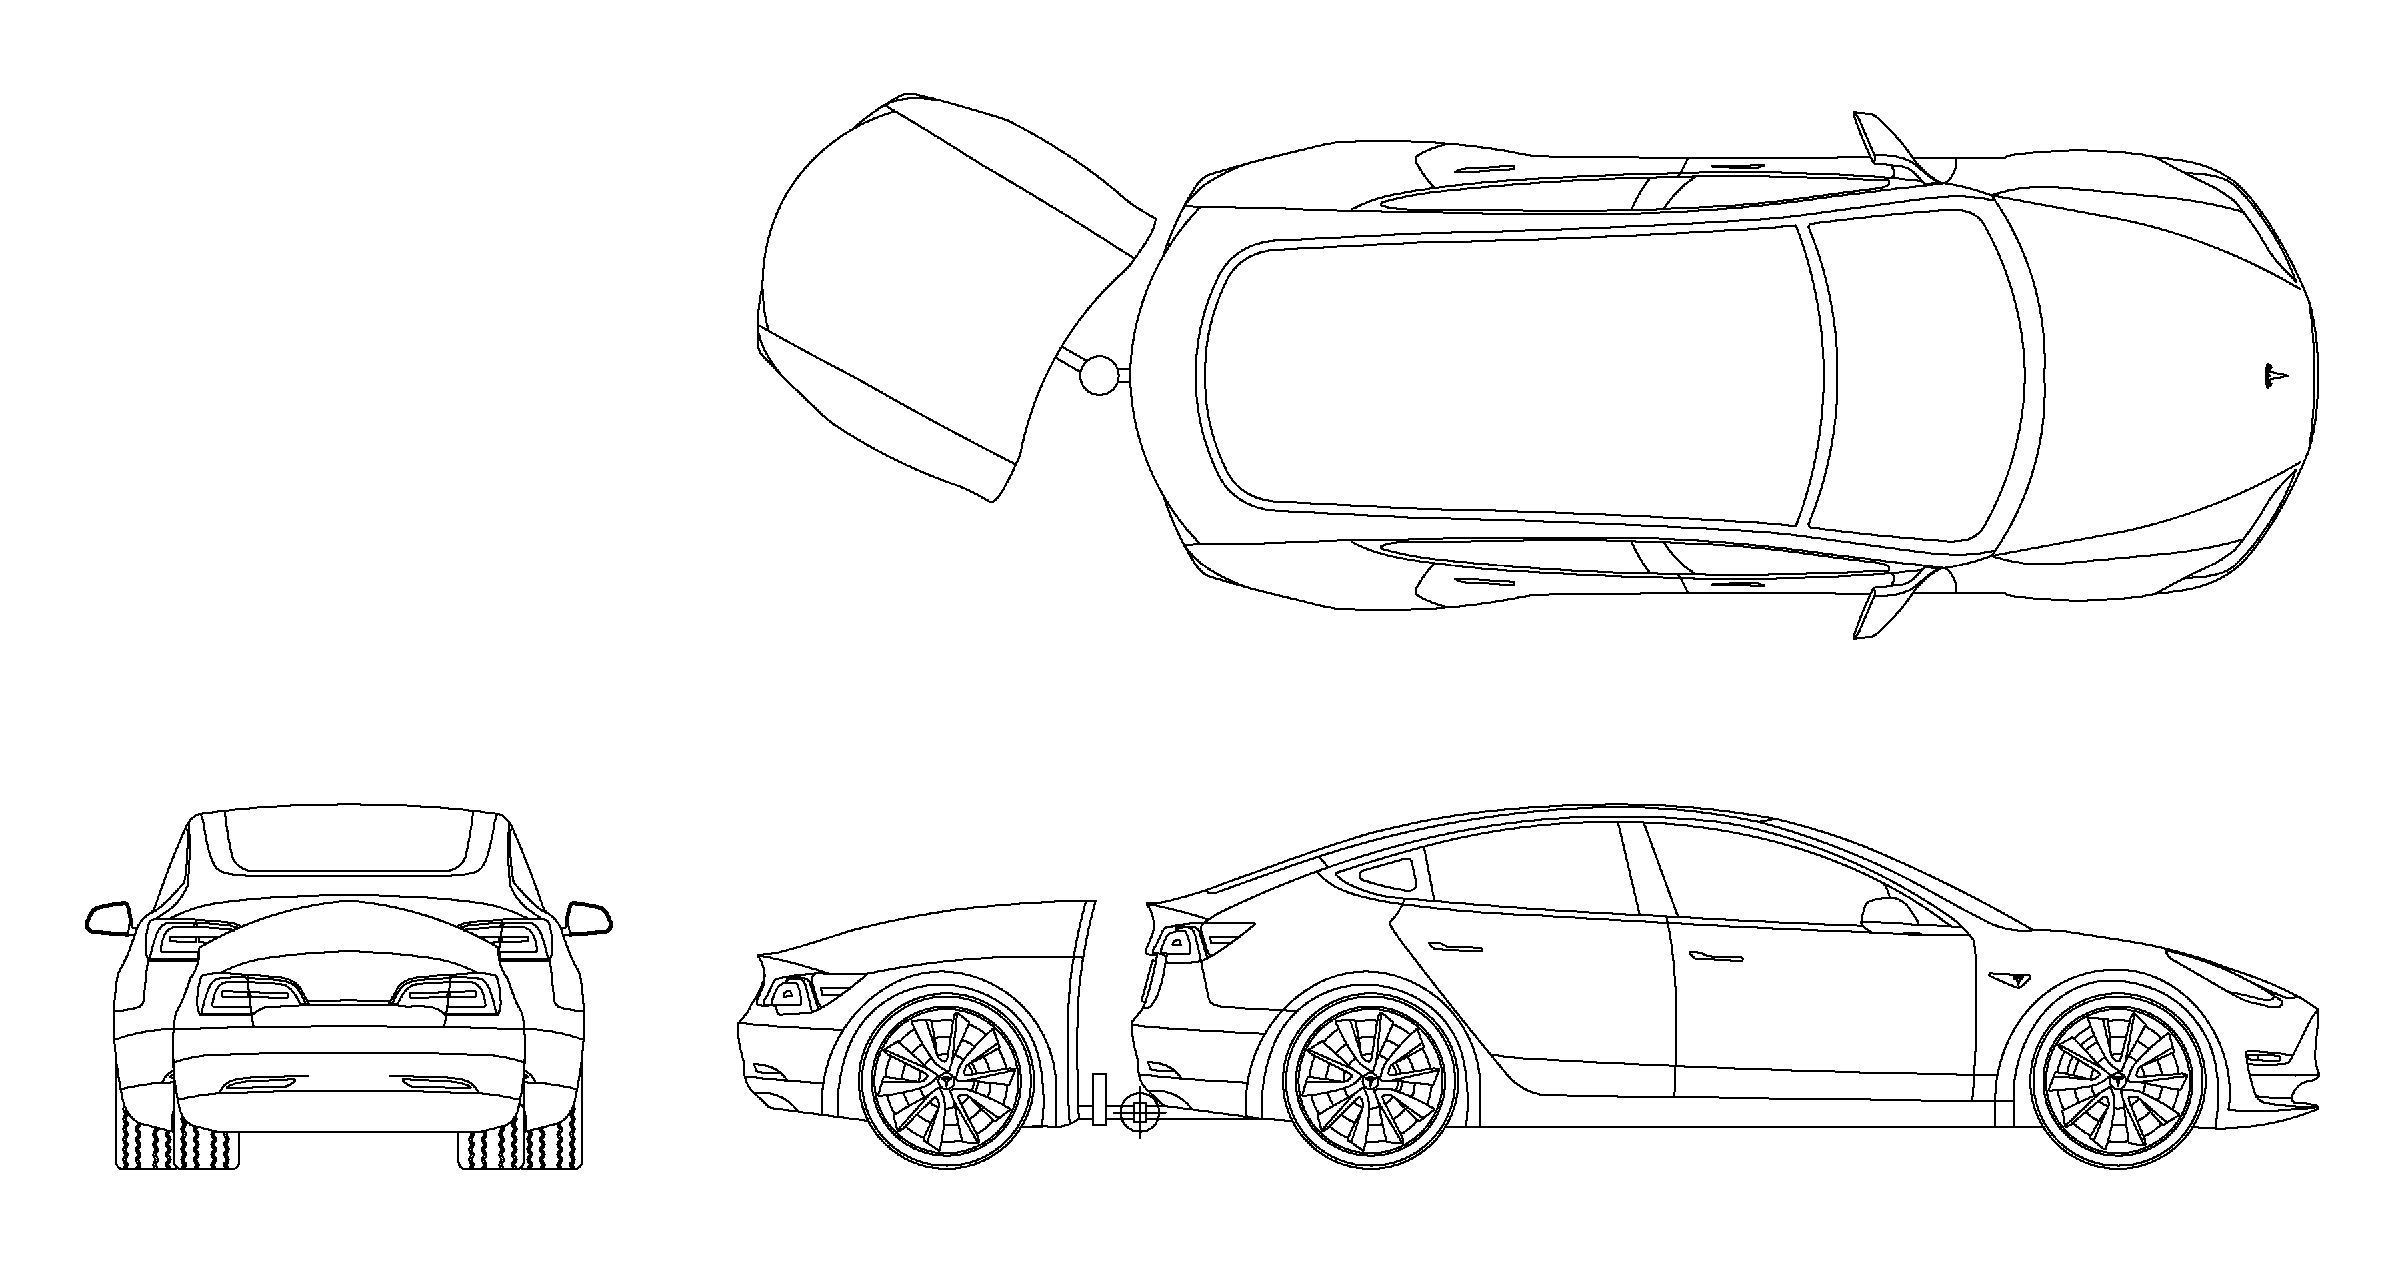 Proposed Tesla Model 3 with Glideway system